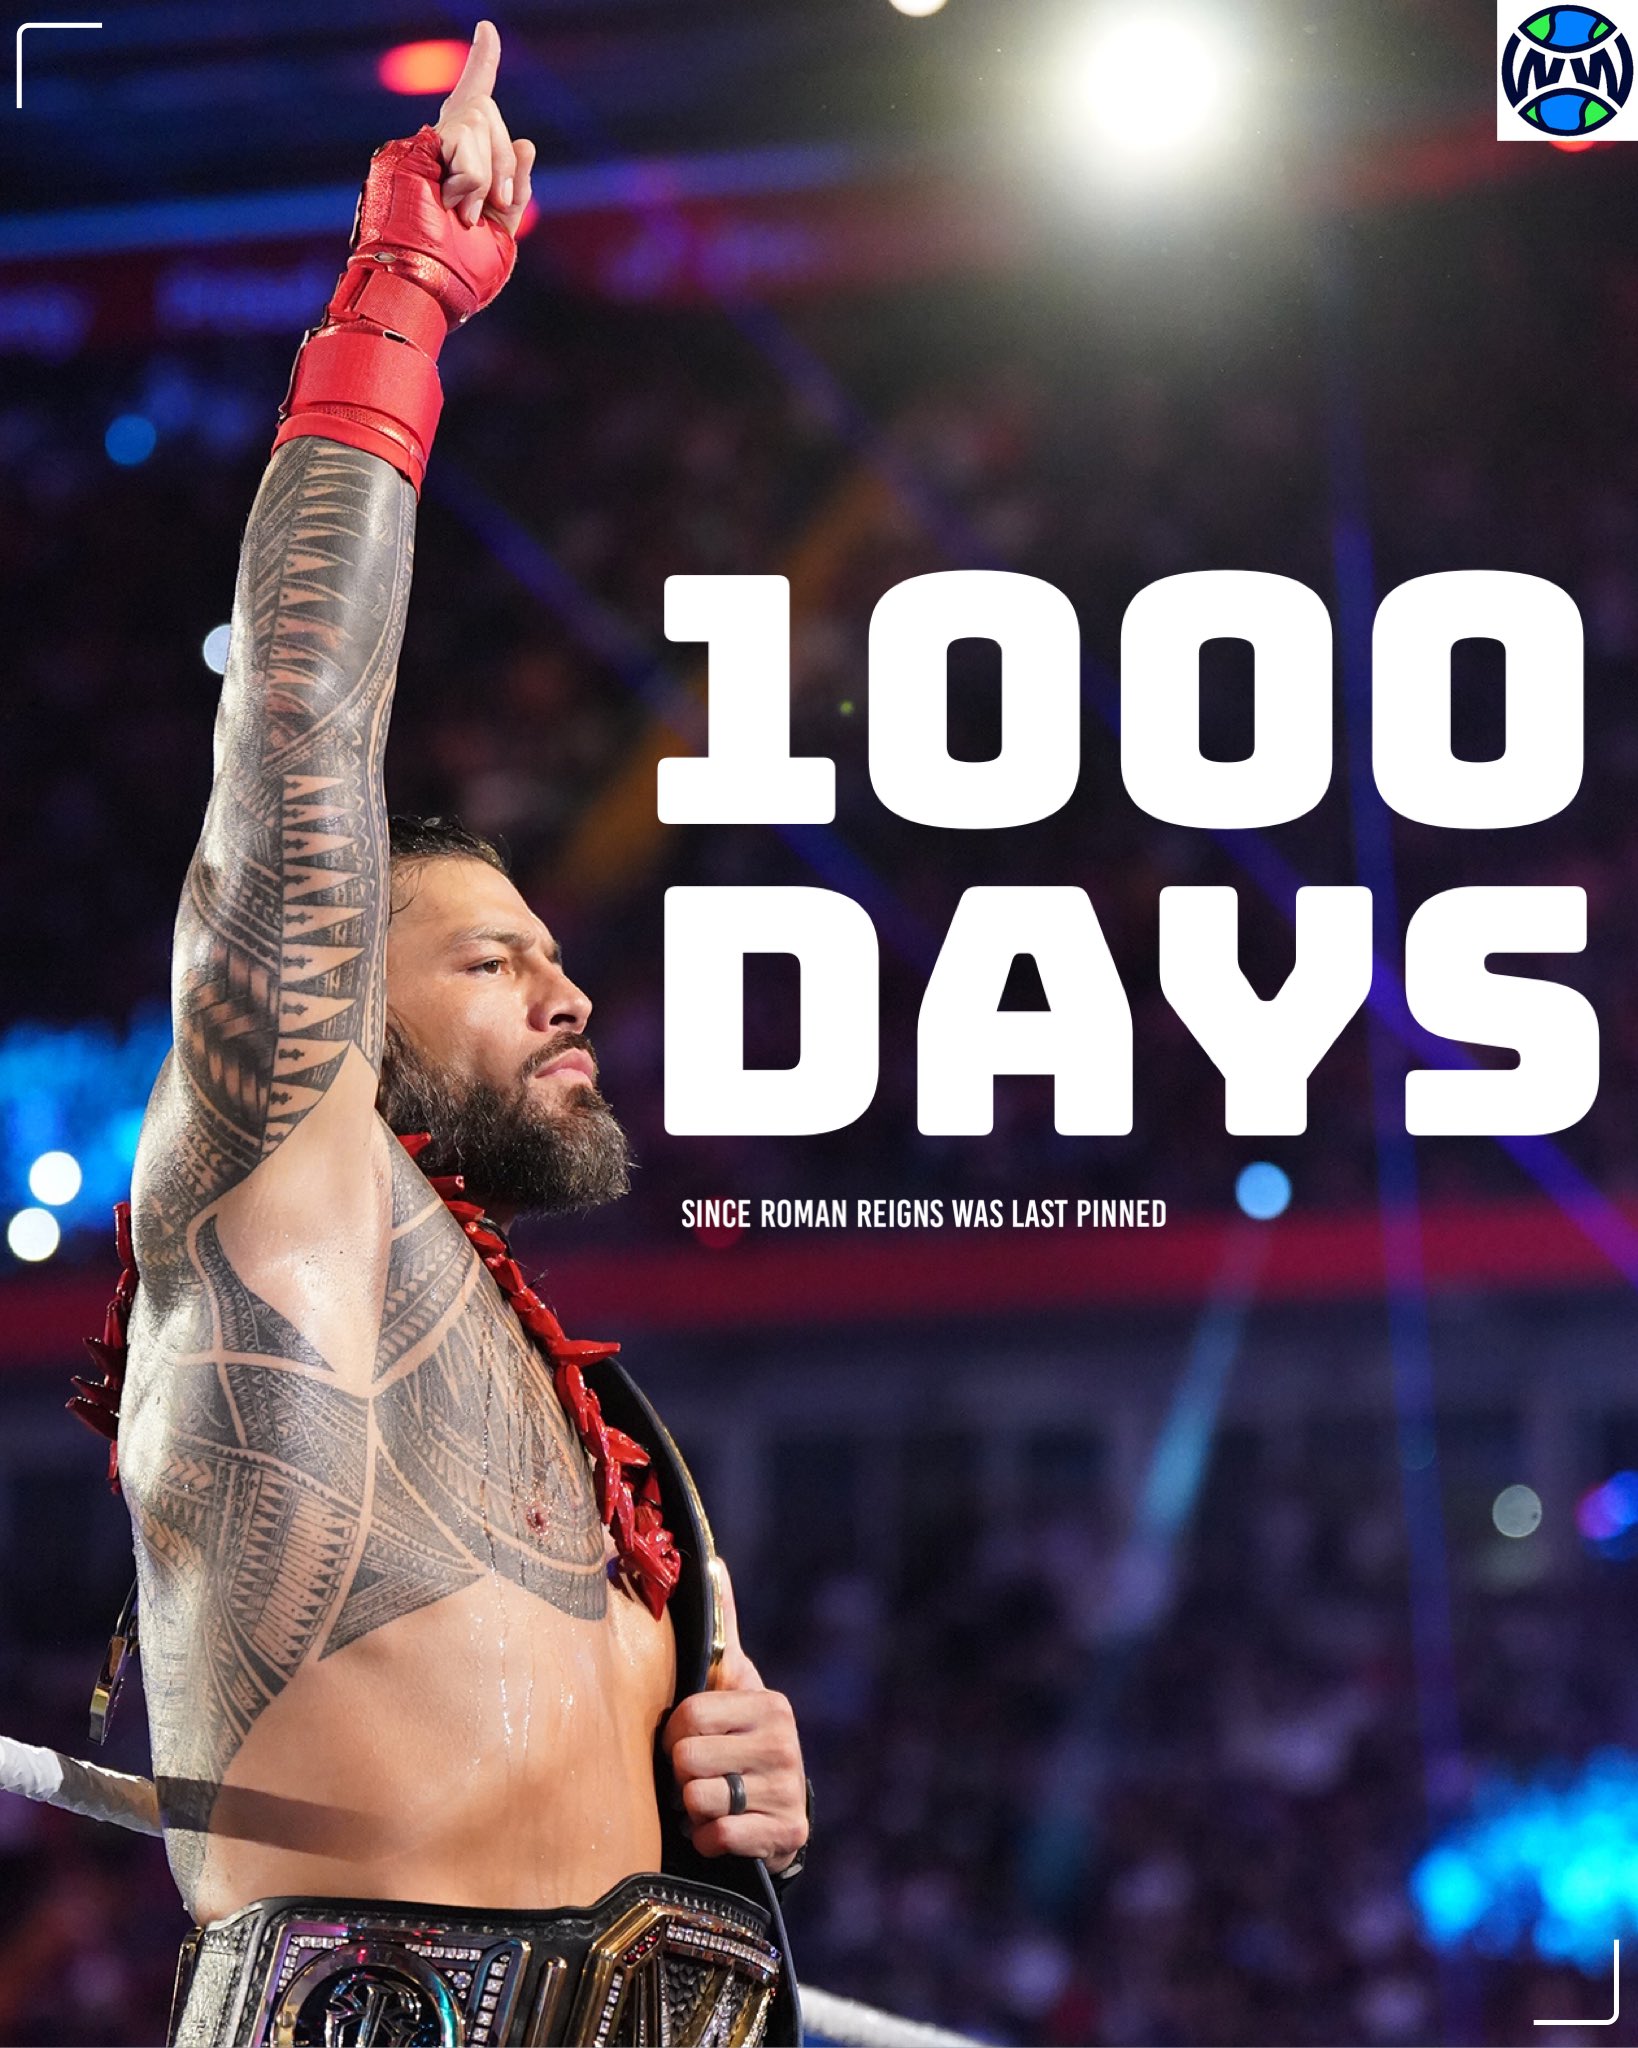 Roman Reigns Surpasses 1000+ Days In WWE Without Pinfall Loss 1